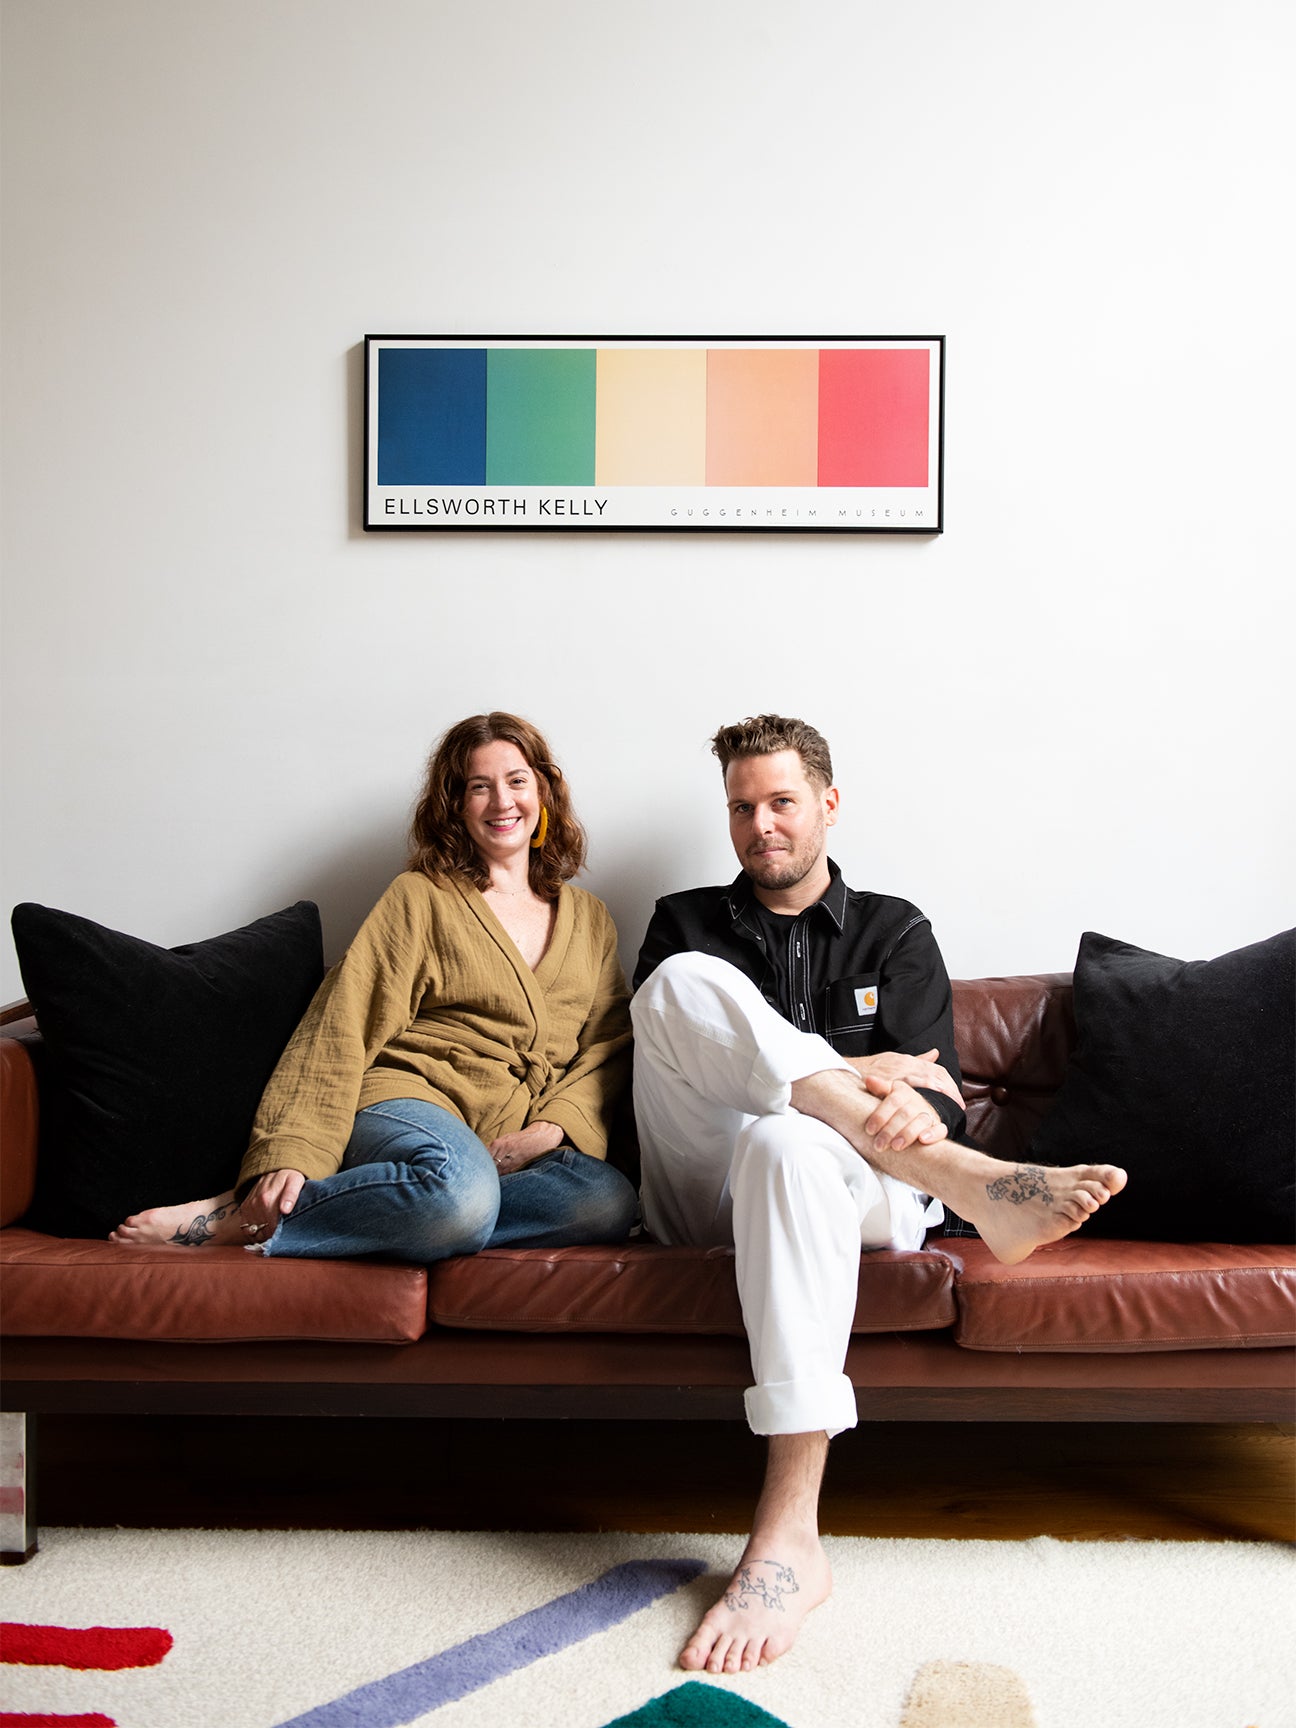 Meghan Lavery and Daniel King, founders of Home Union